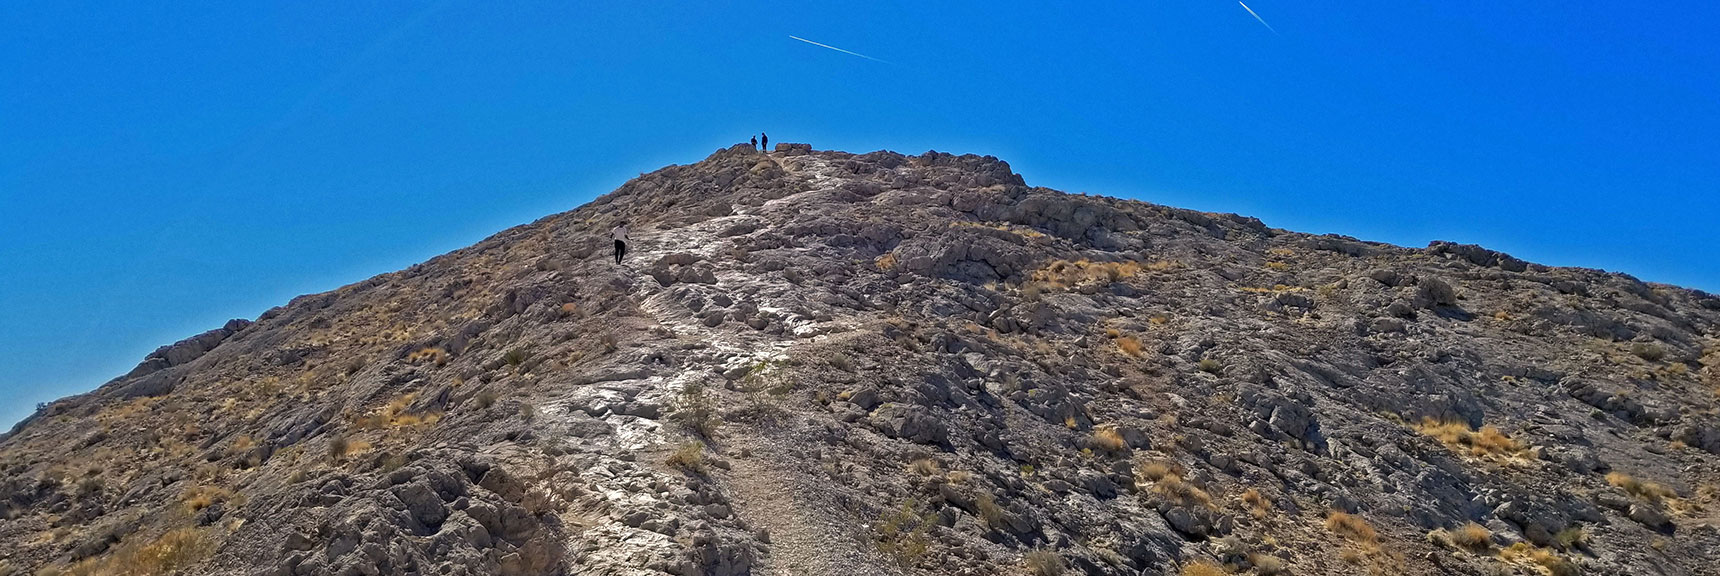 Summit in Sight During Final Approach | Lone Mountain | Las Vegas, Nevada